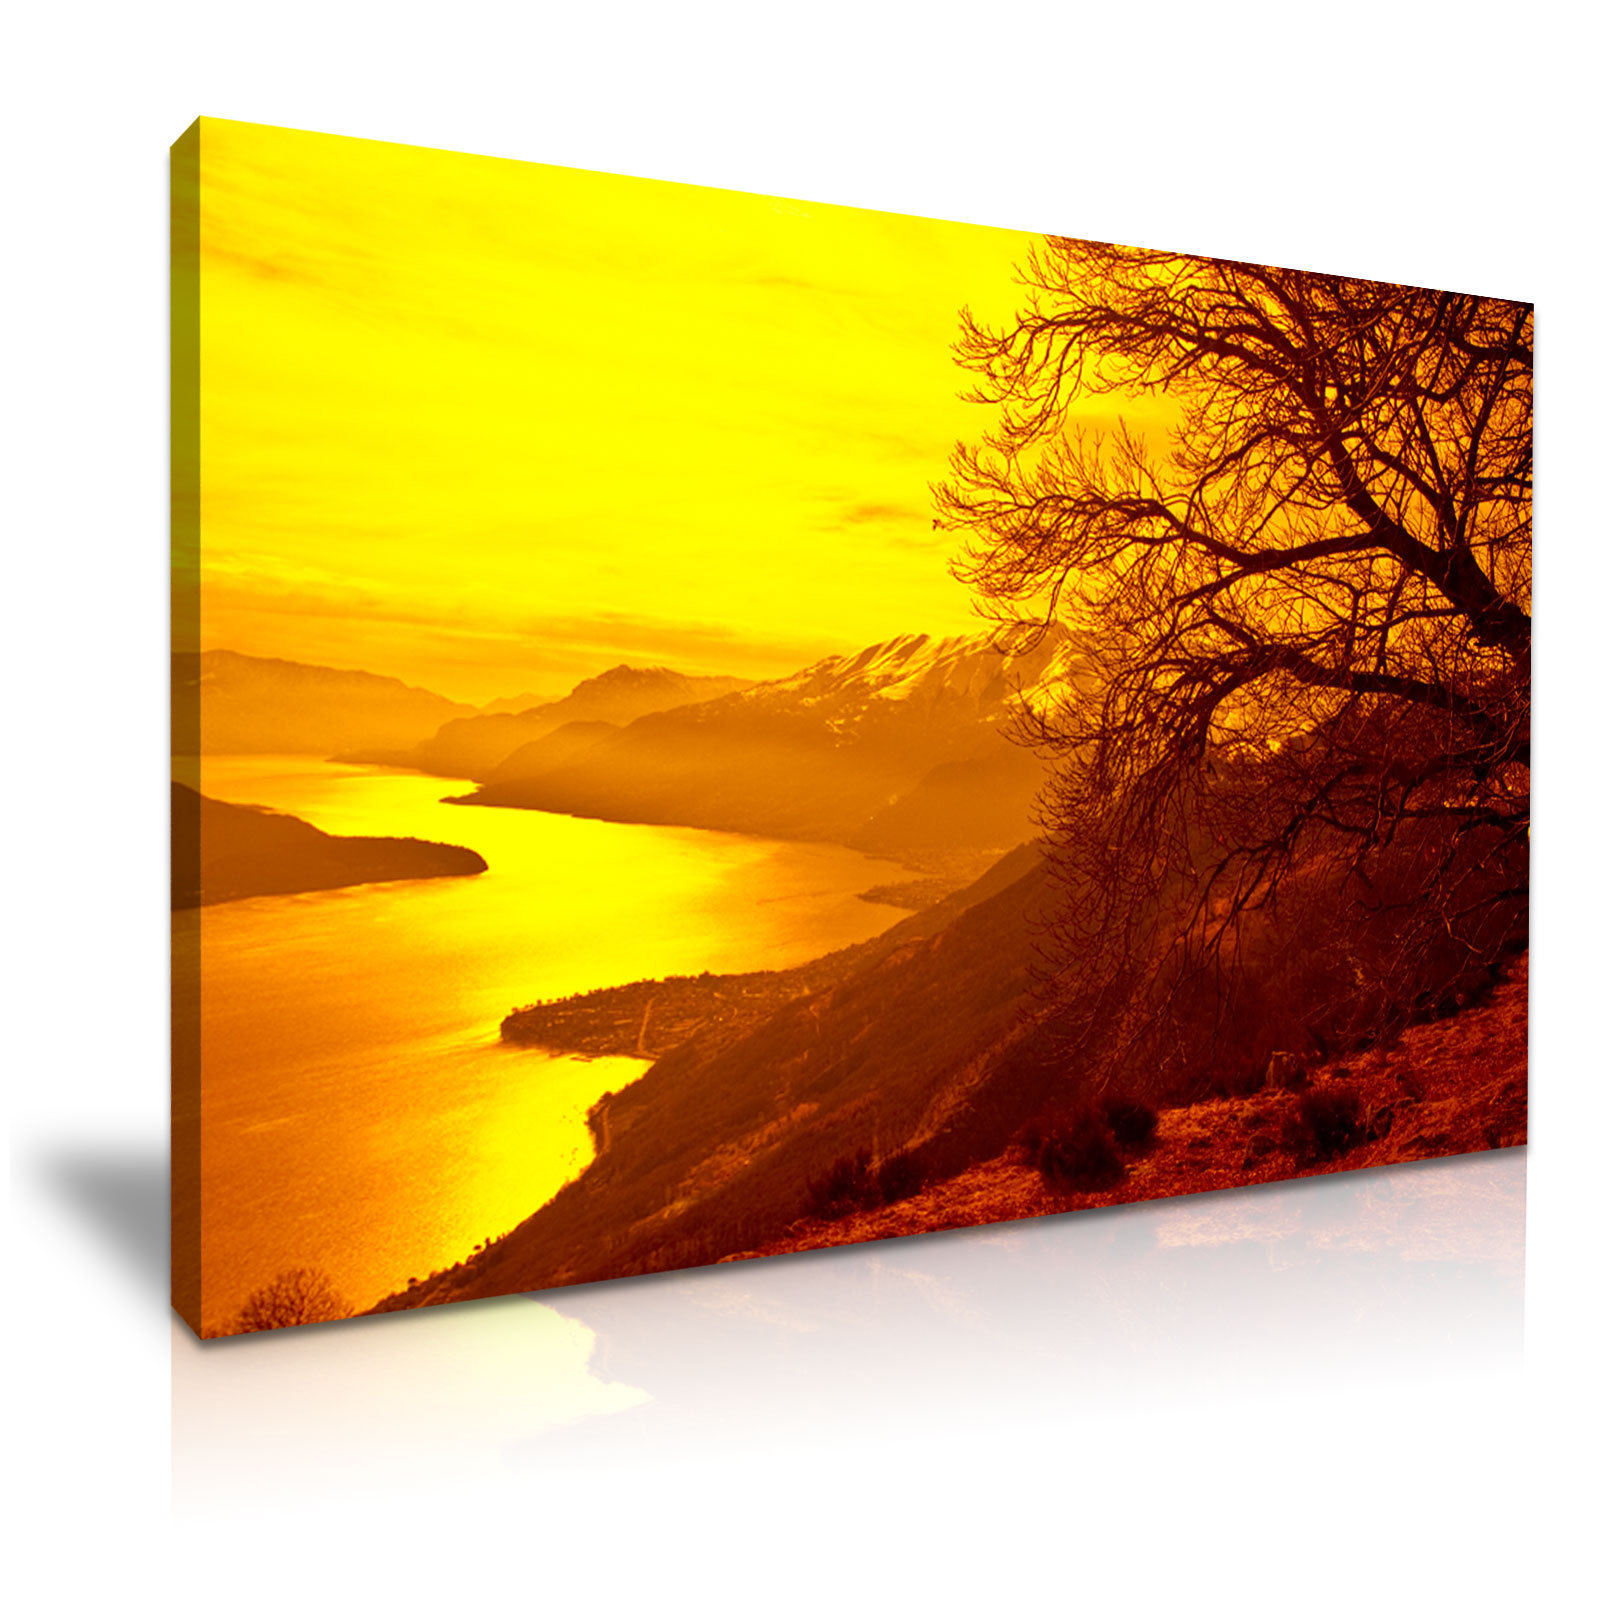 Golden Evening Twilight Canvas Printed Painting for Wall Decoration